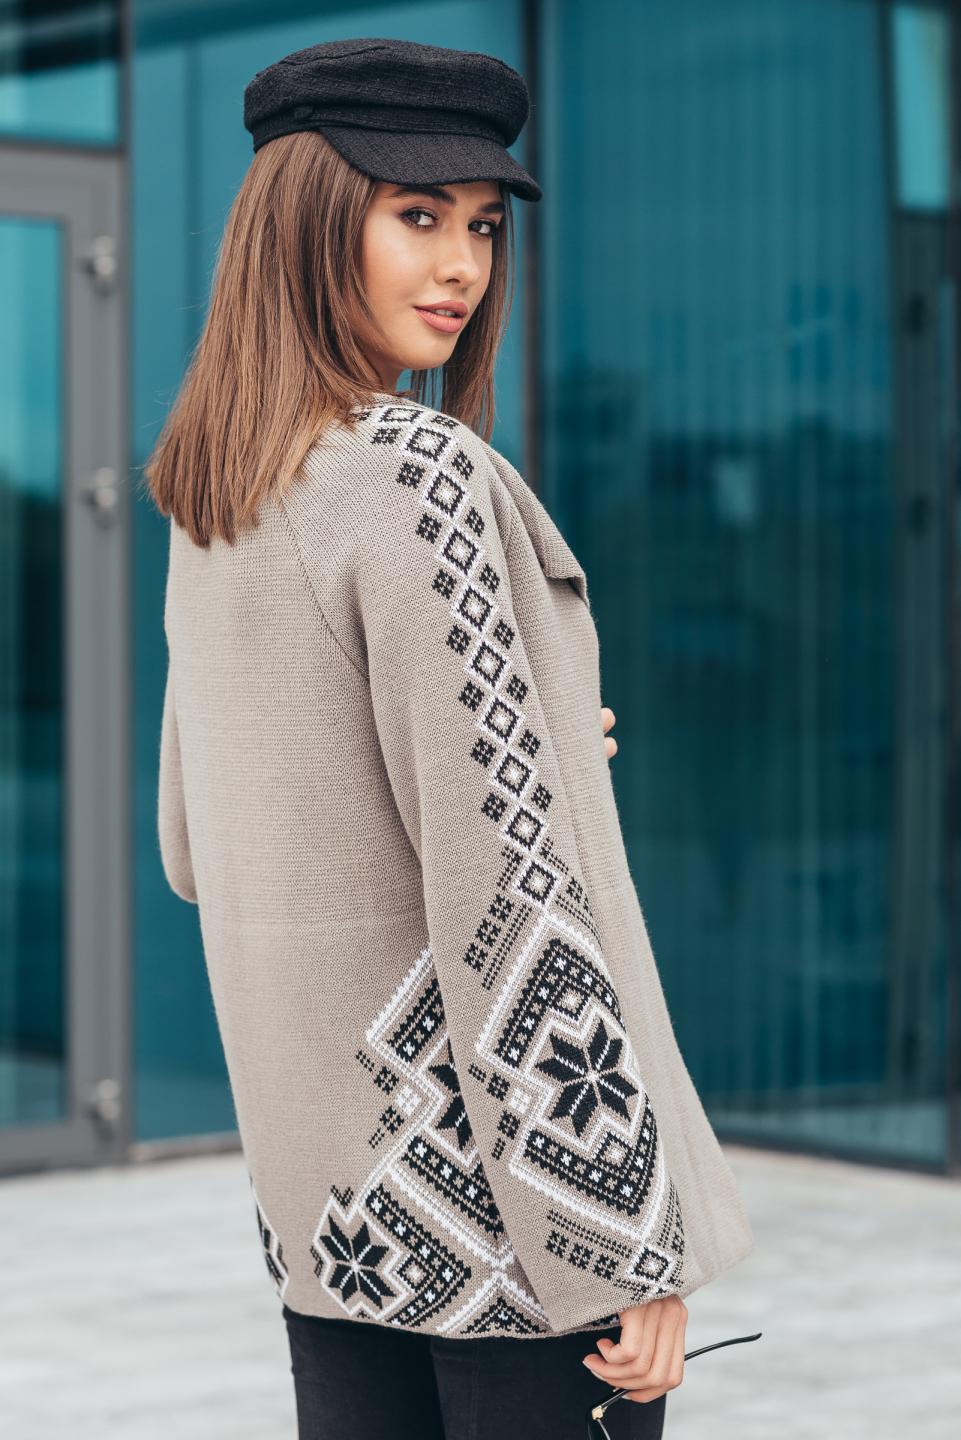 Knitted jacket in ethnic style &quot;Kristina&quot; (cappuccino, black, white)